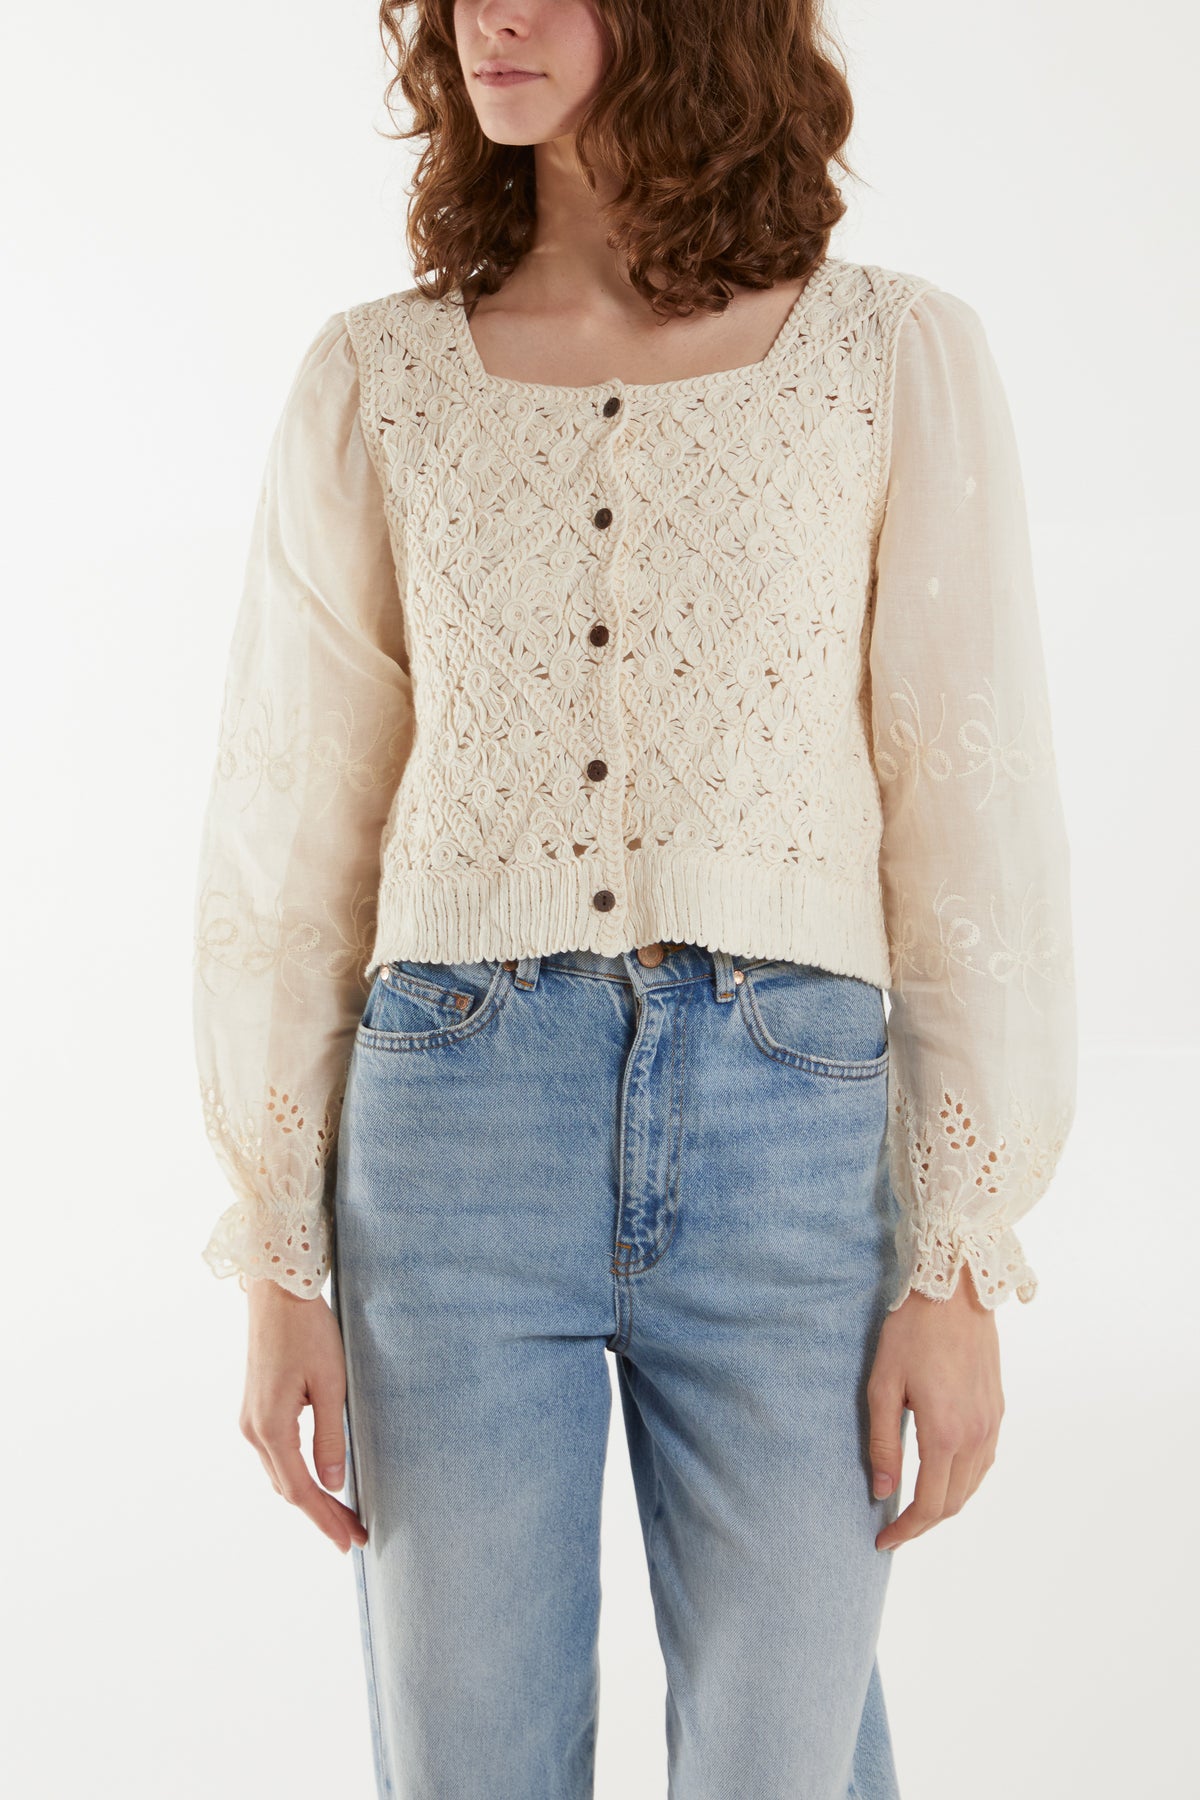 Crochet & Broderie Anglaise Detail Cardigan